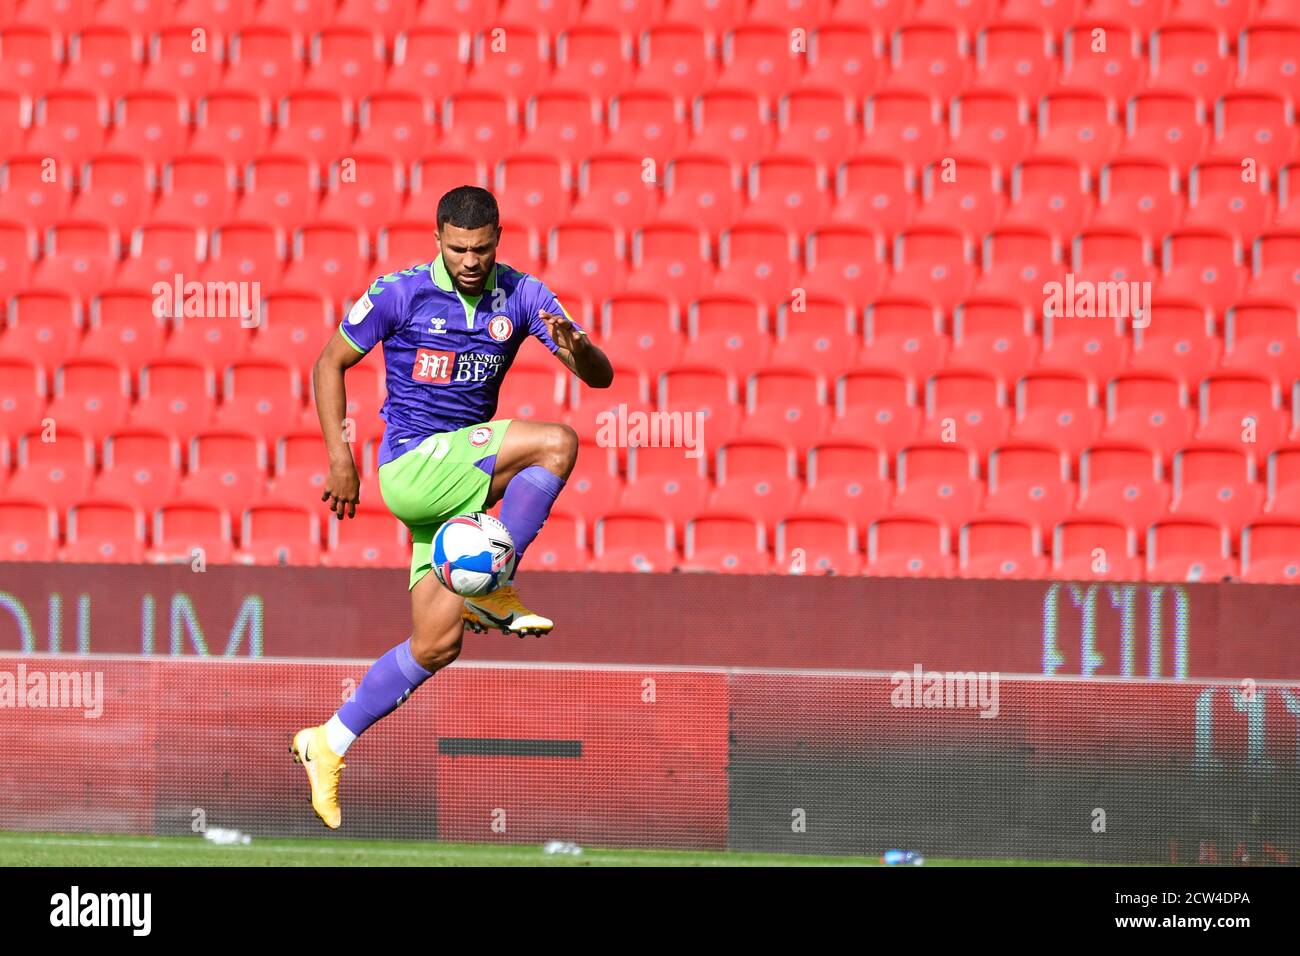 Nahki Wells (21) of Bristol City controls the ball in front of an empty stand Stock Photo